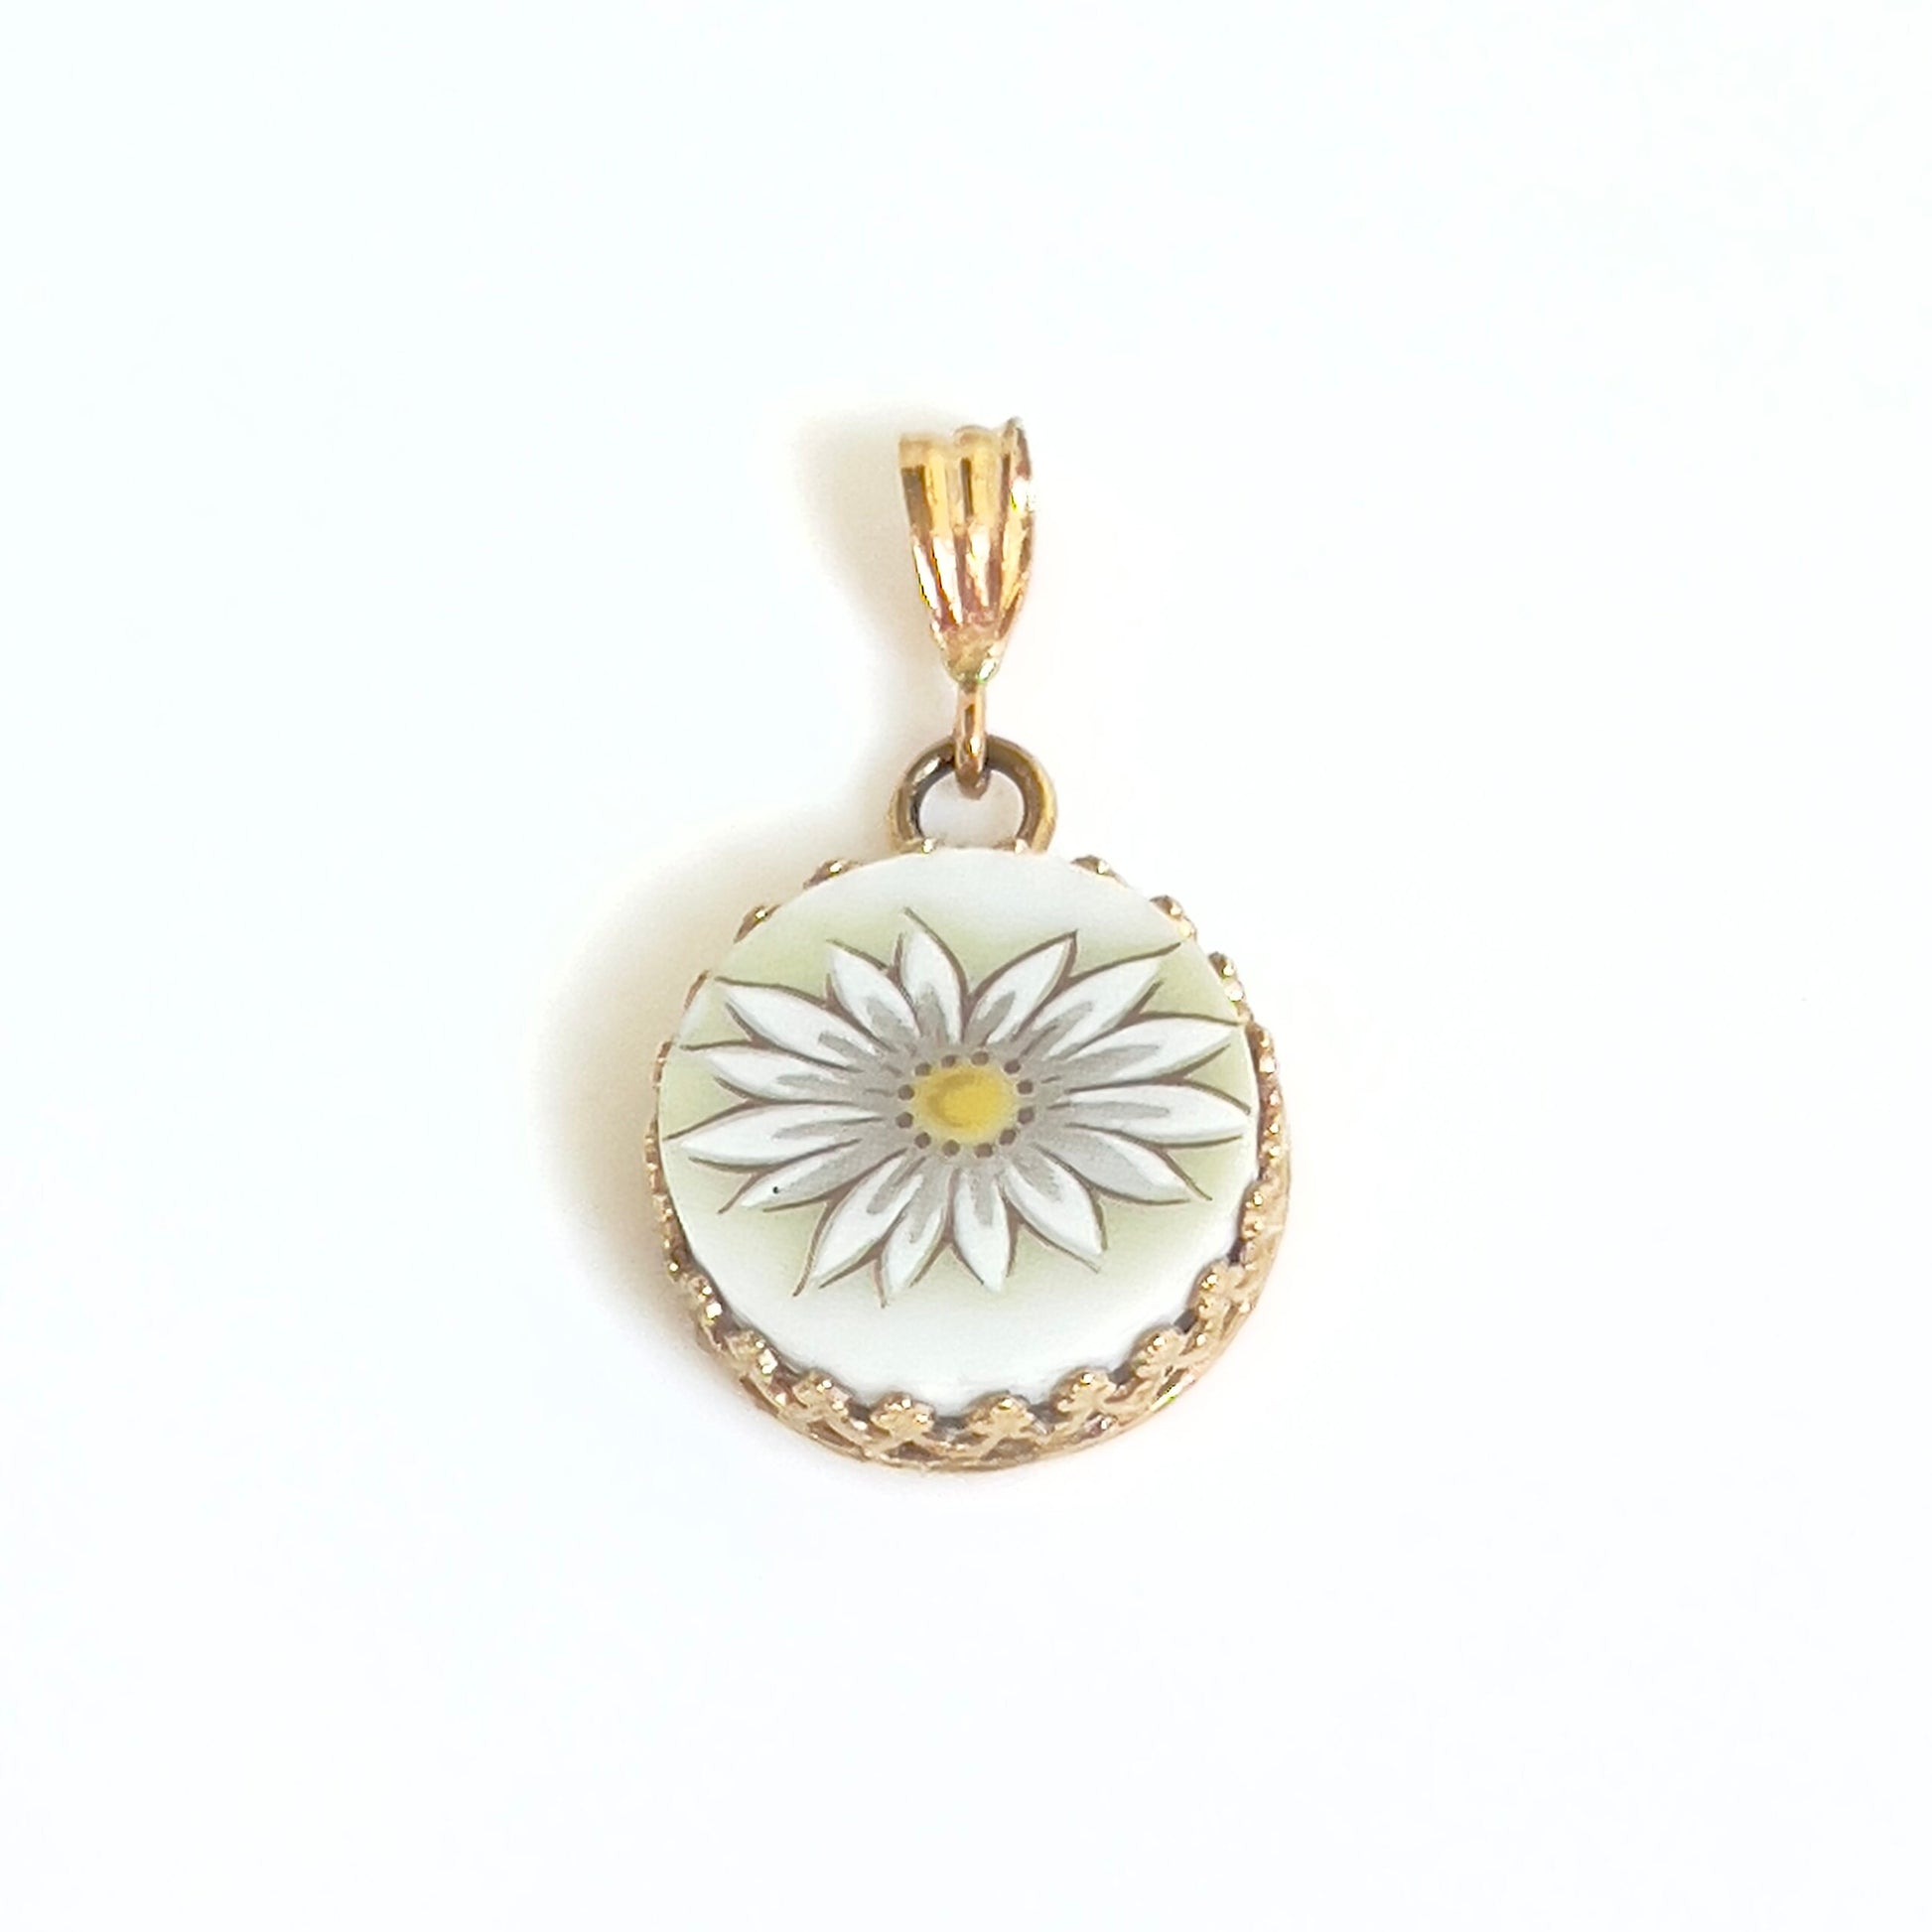 14k Gold Pendant or Necklace, Daisy Broken China Jewelry, 20th Anniversary Gift for Wife